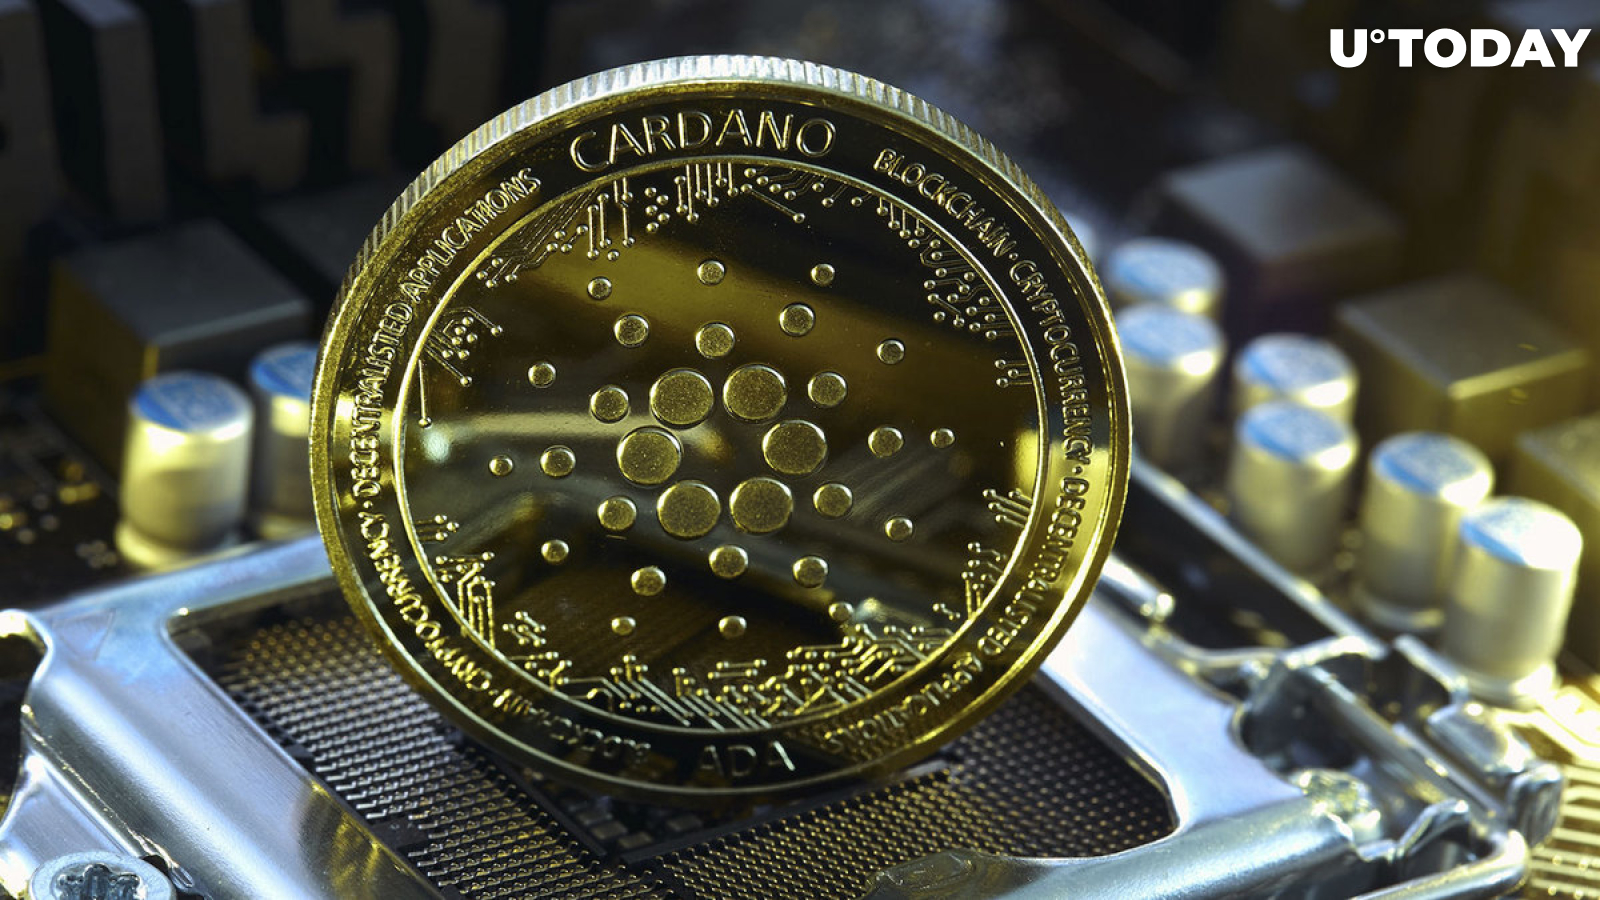 Cardano (ADA) Forms Crucial Support, Targets 'Higher Highs' from Here: Analyst